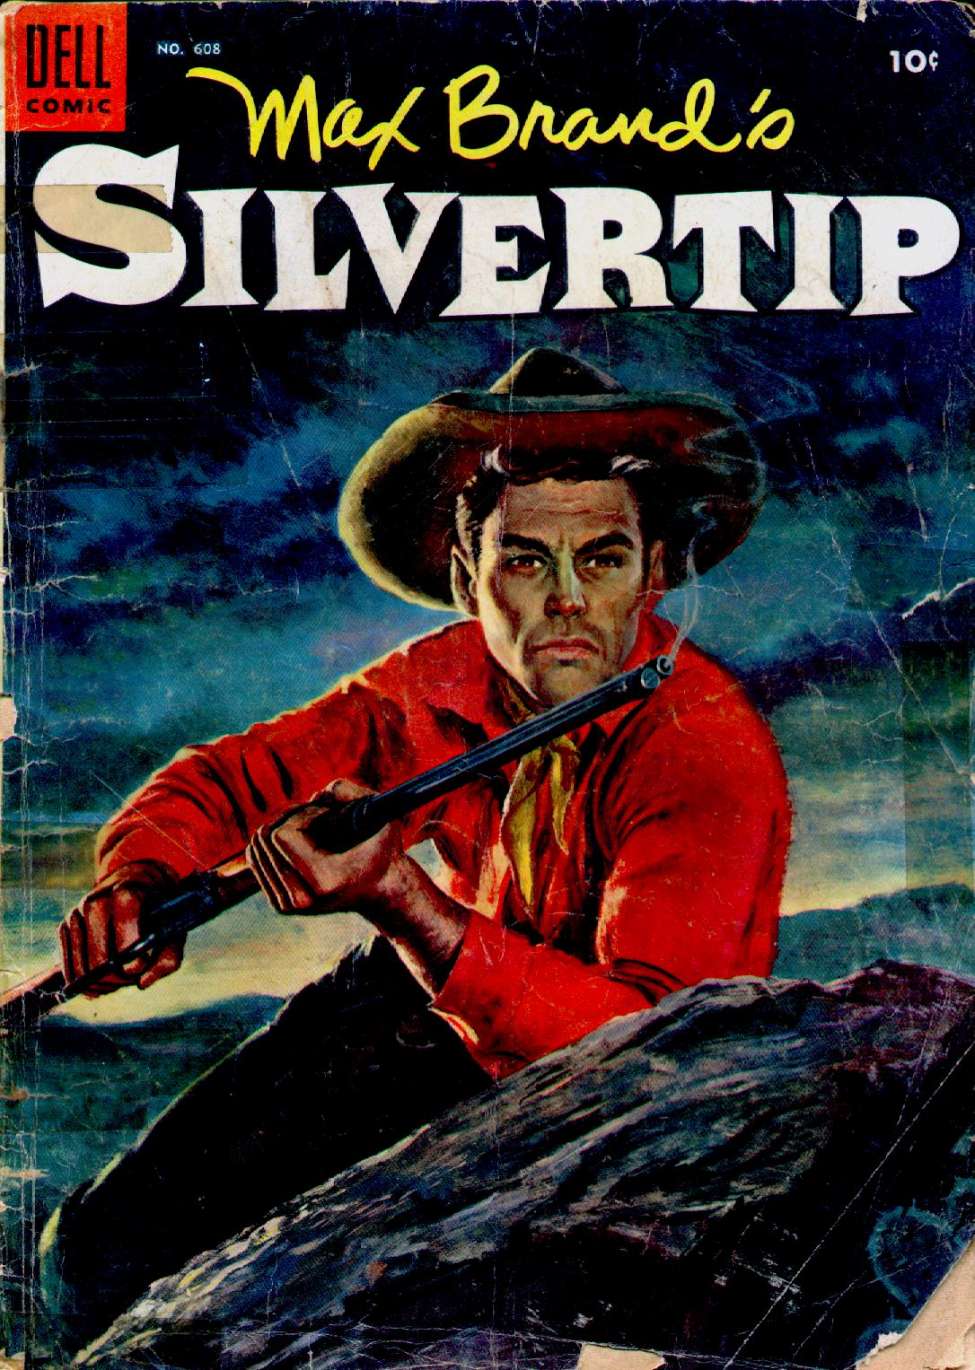 Comic Book Cover For 0608 - Max Brand's Silvertip